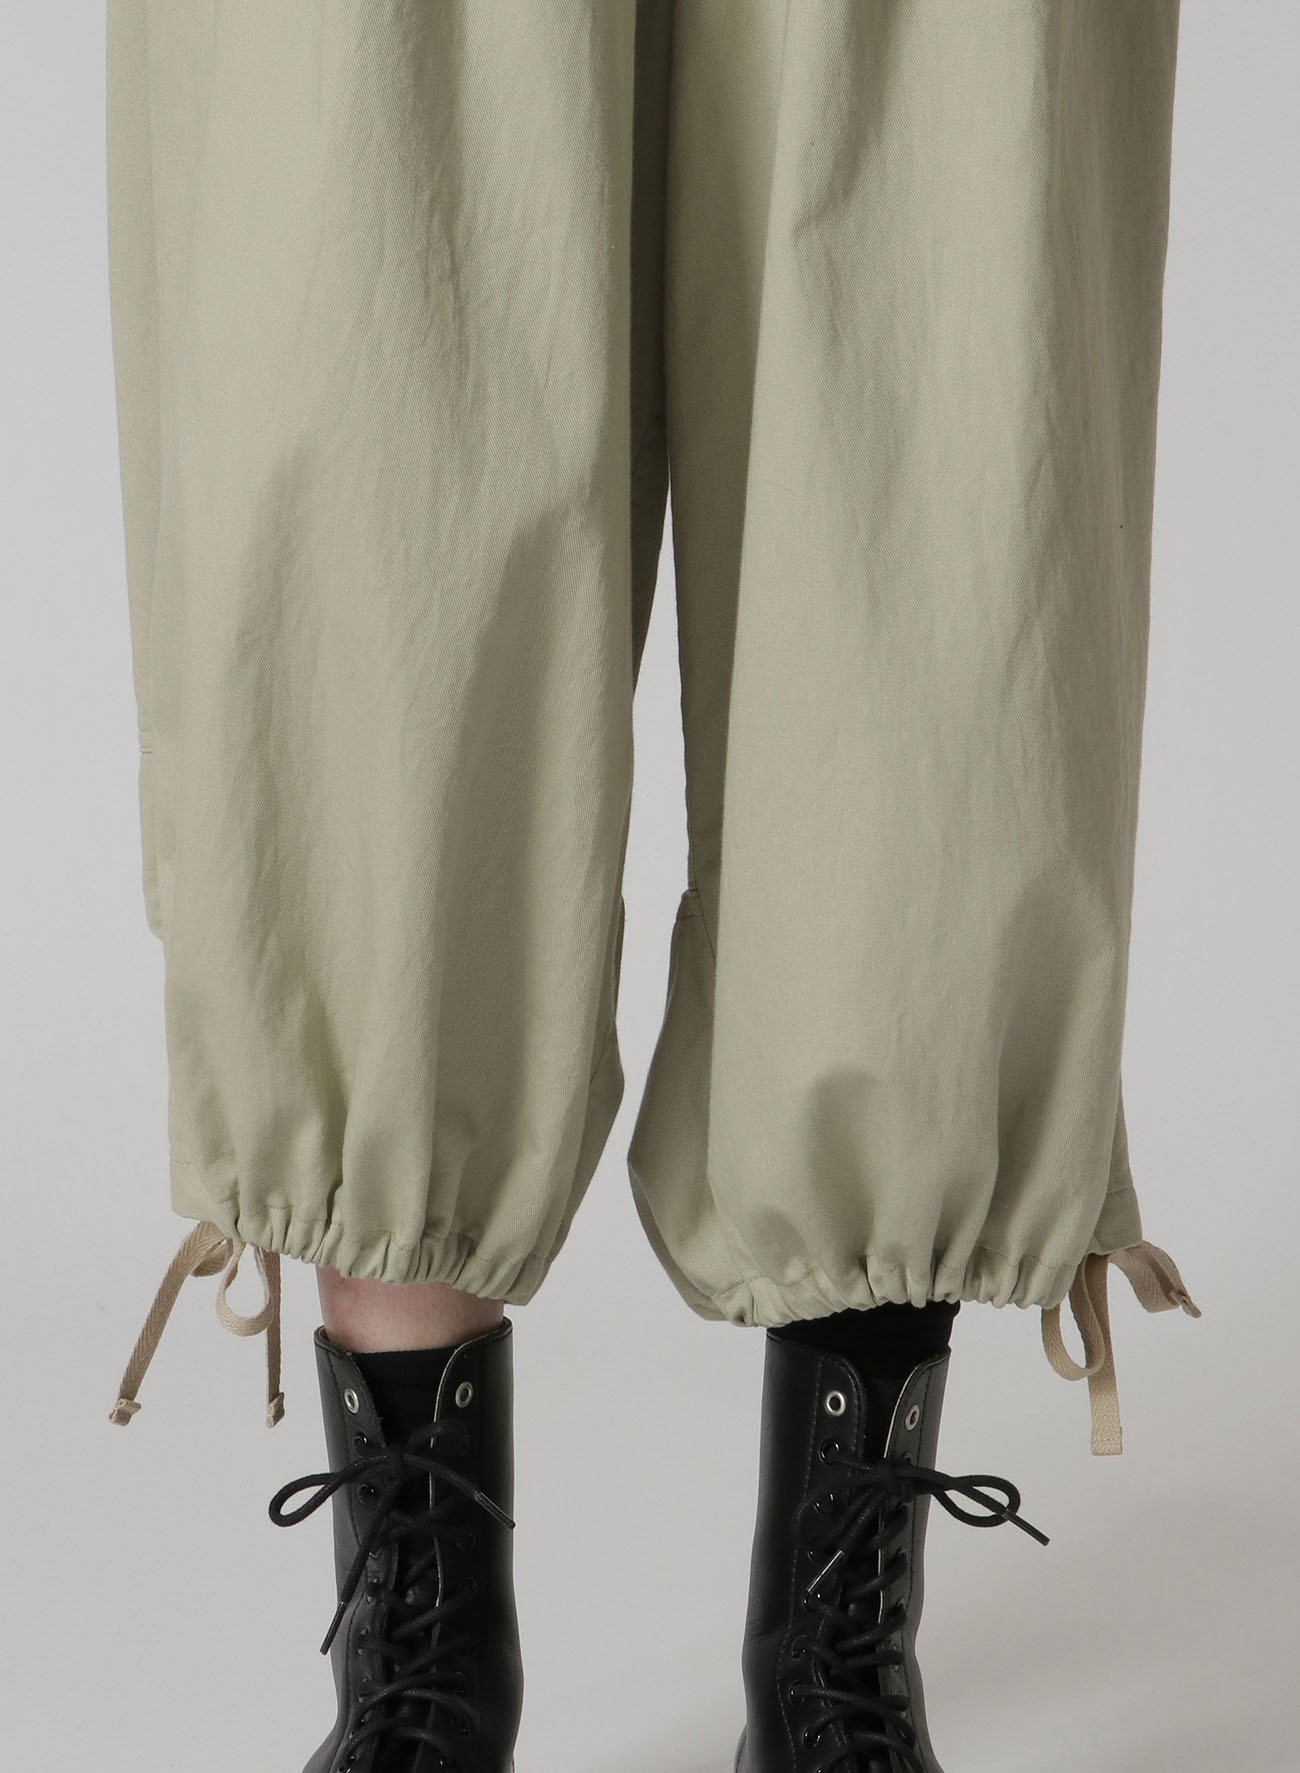 [Y's BORN PRODUCT]COTTON TWILL BACK TUCK PANTS